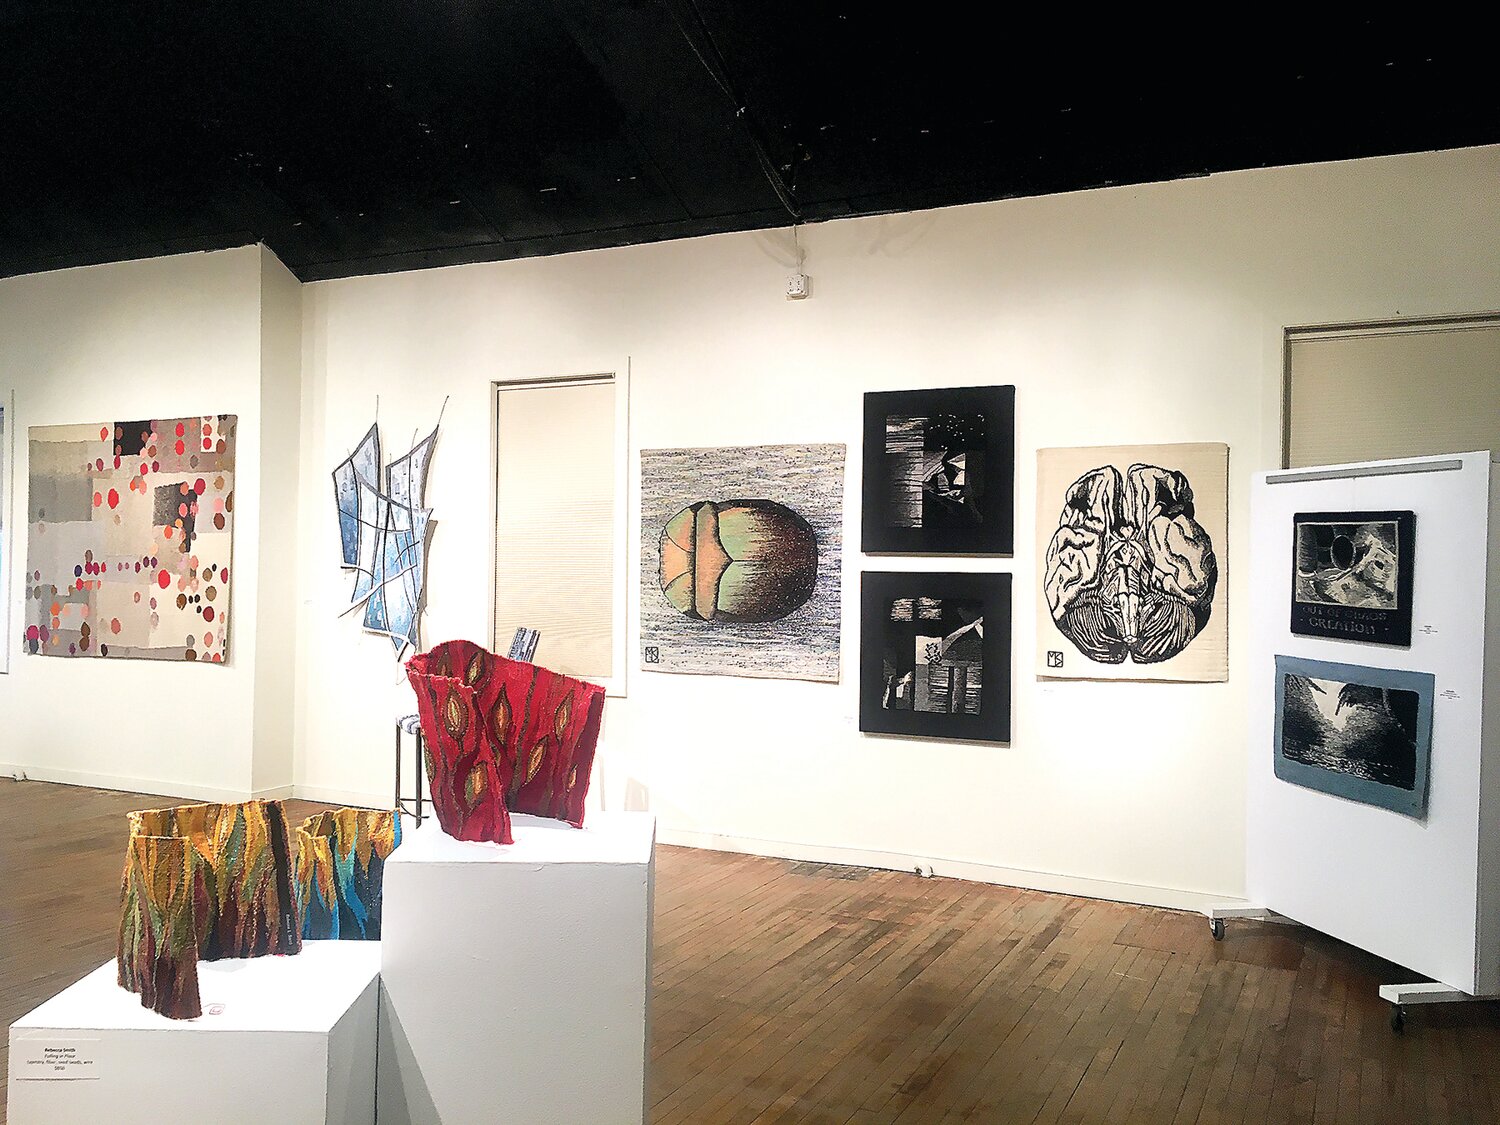 A previous gallery view at New Hope Arts Center from the Weaving Re-Imagined exhibition in 2021.